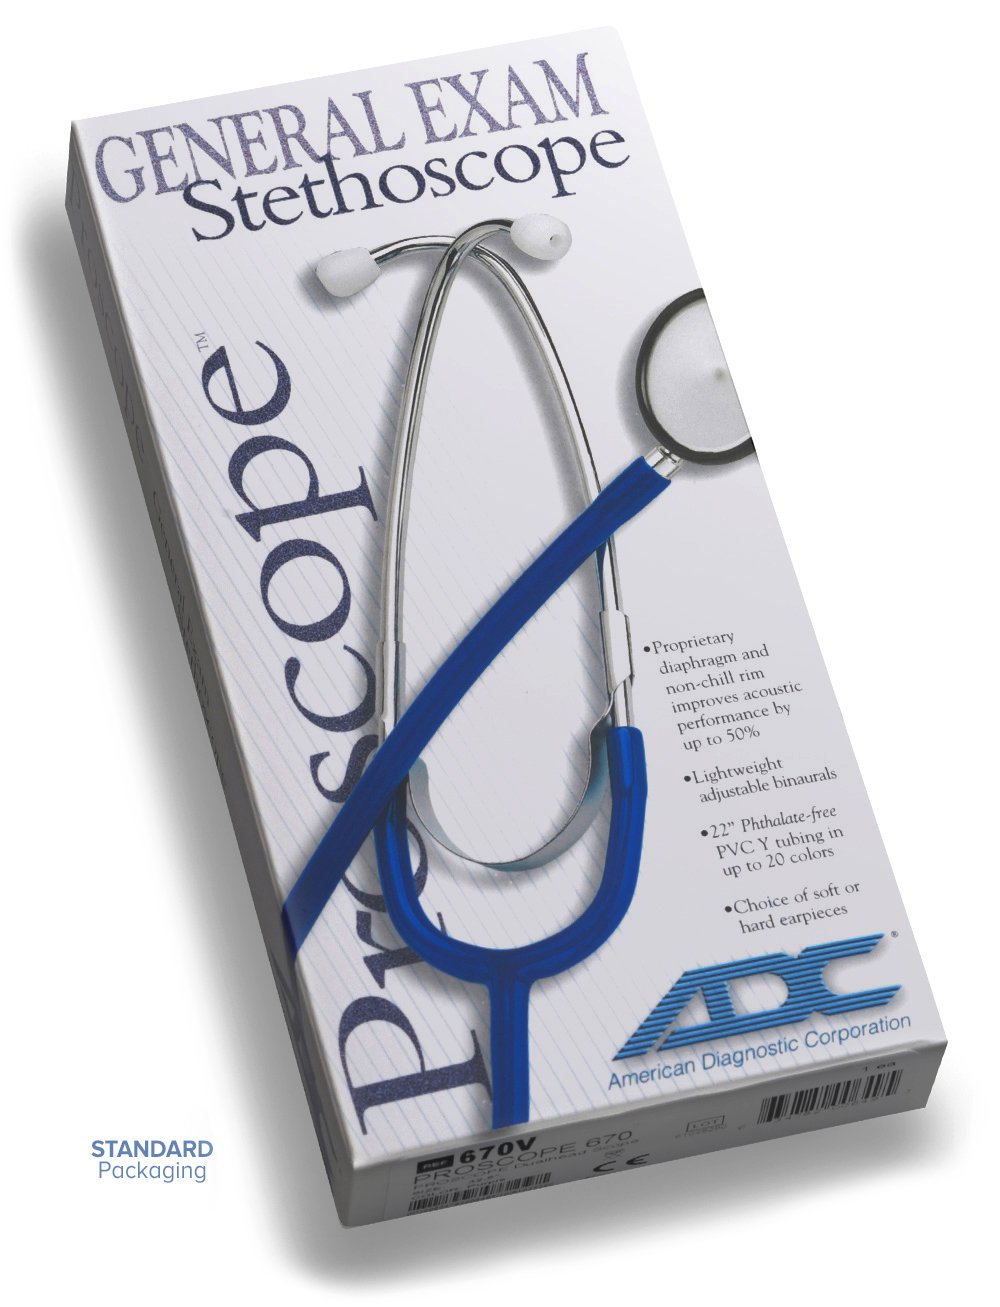 Acoustic Dual-Head Stethoscope ON SALE - FREE Shipping